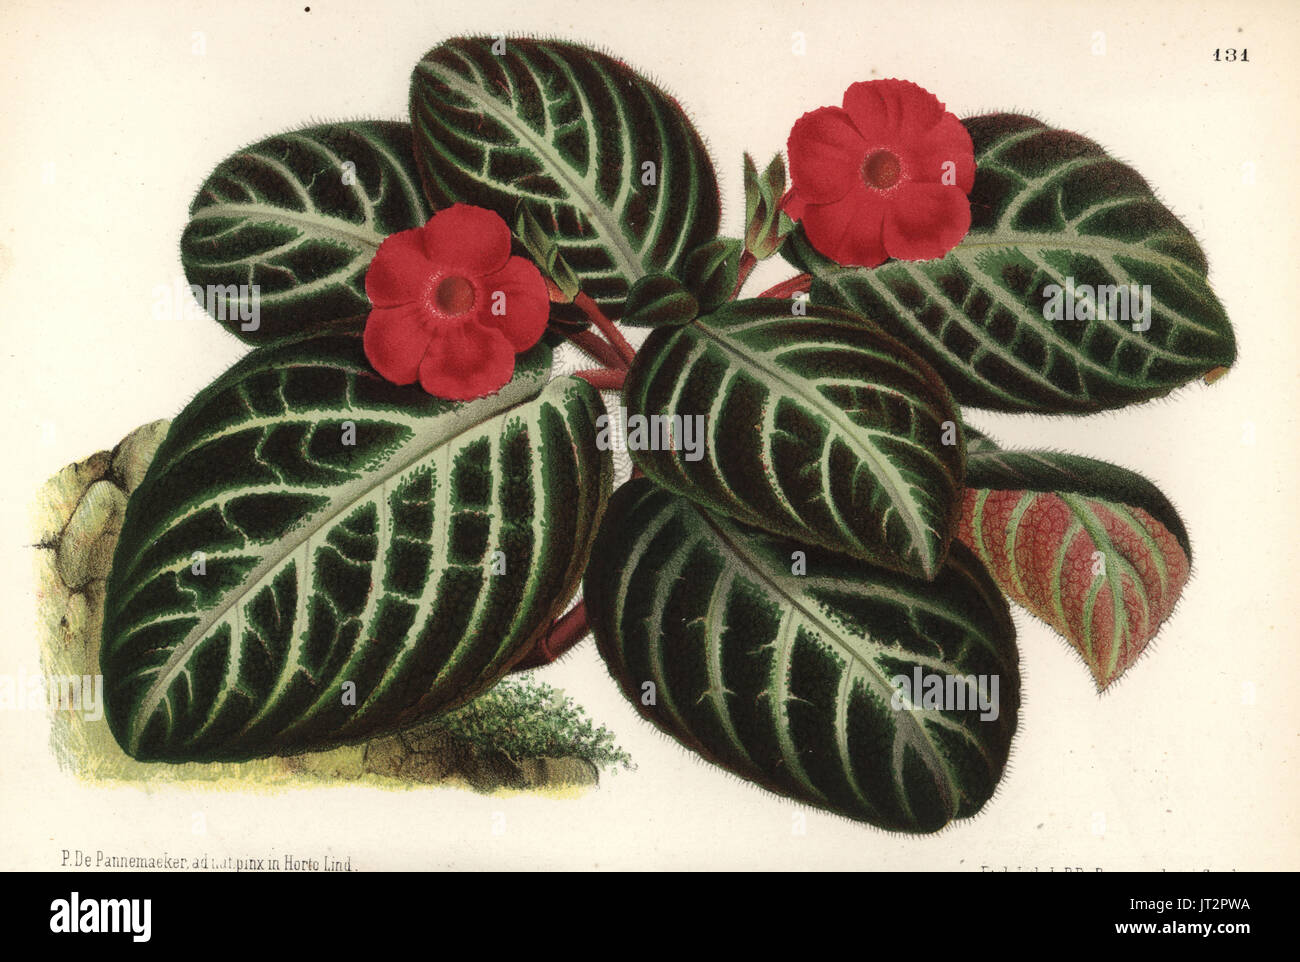 Episcia reptans foliage plant (Cyrtodeira fulgida). Drawn and chromolithographed by P. de Pannemaeker from Jean Linden's l'Illustration Horticole, Brussels, 1873. Stock Photo